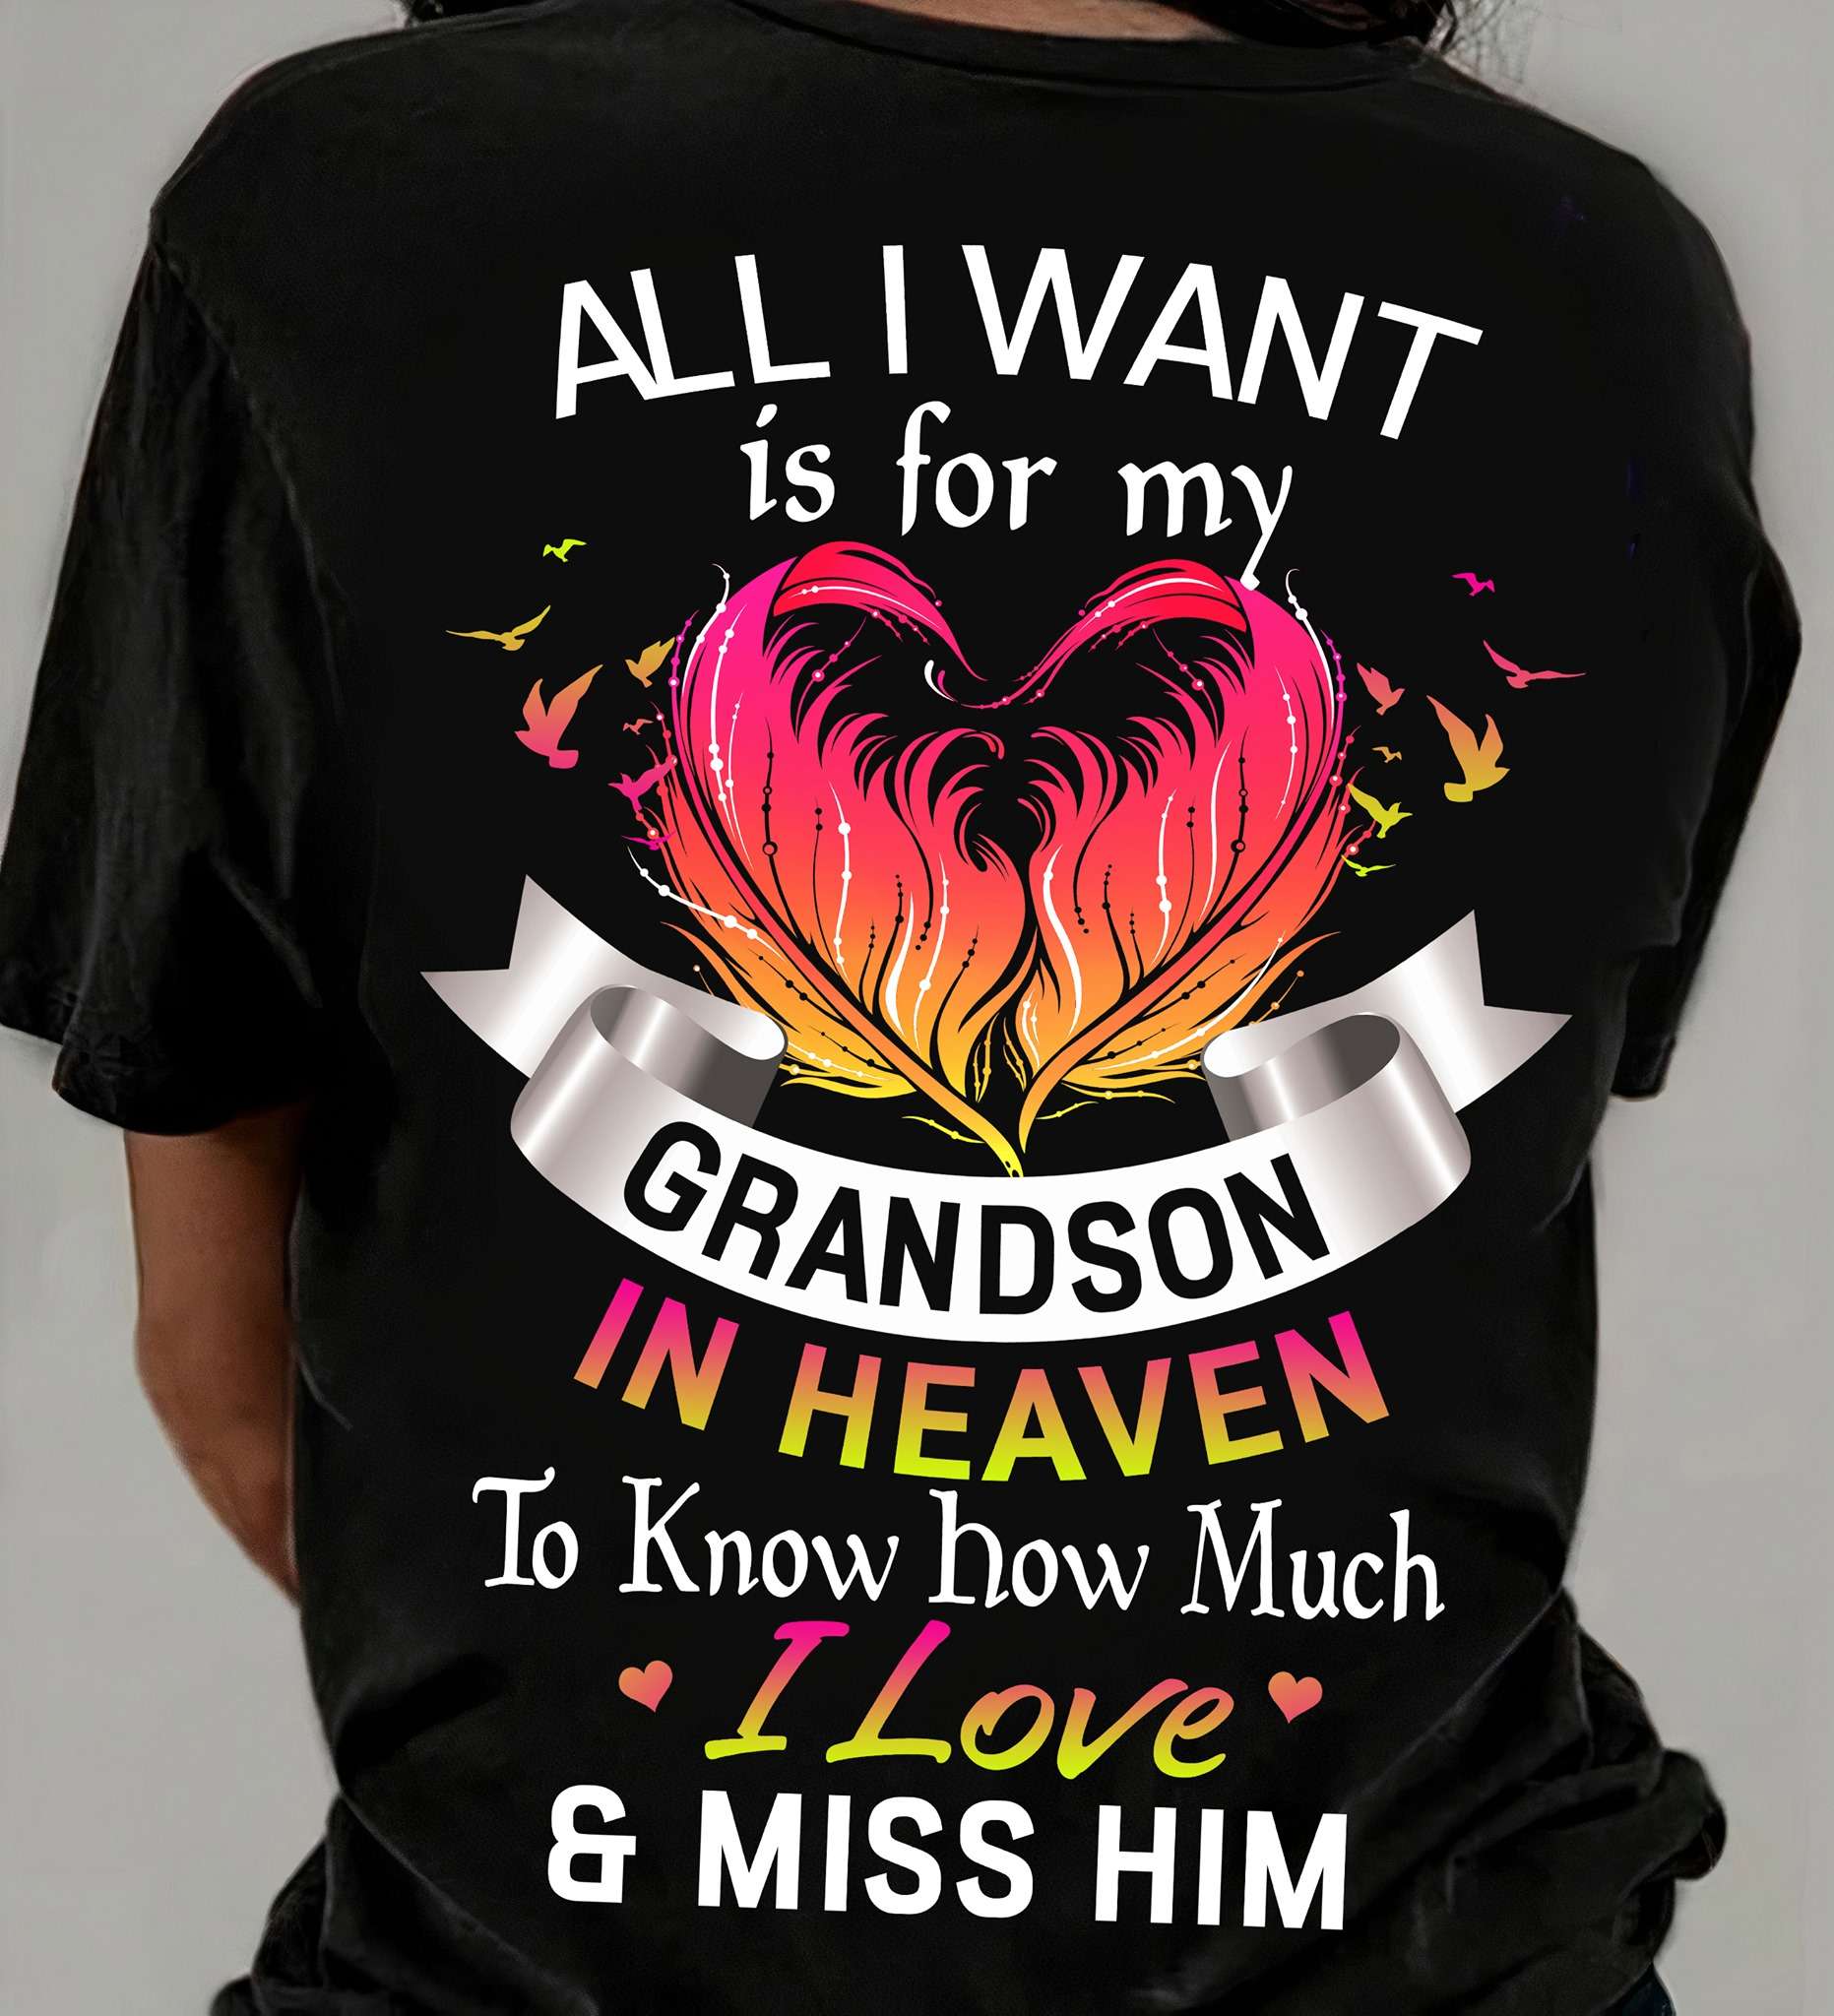 All I want is for my grandson in heaven to know how much I love and miss him - Grandparent and grandson